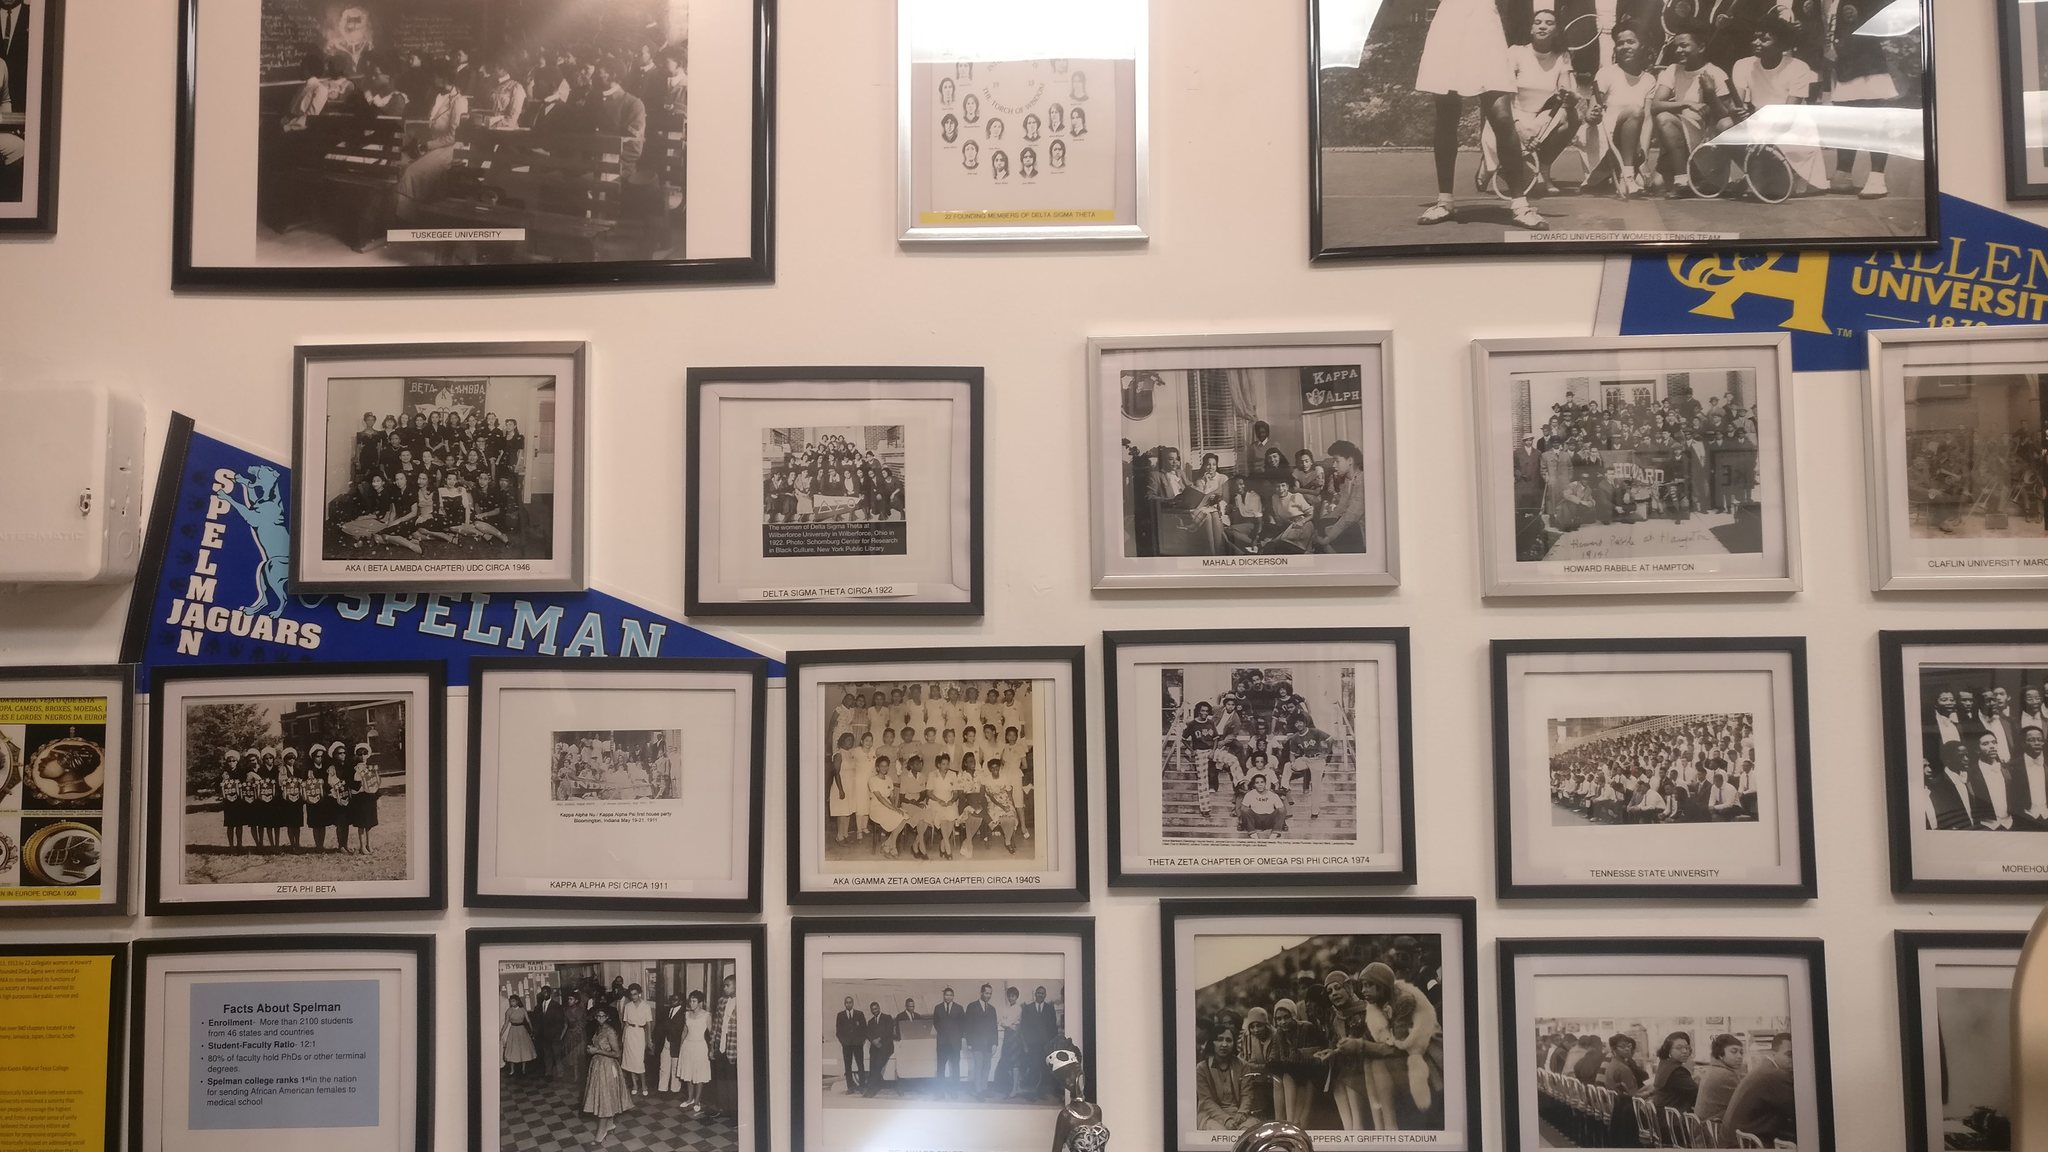 Local Museum Brings Awareness to HBCU’s, Black Excellence